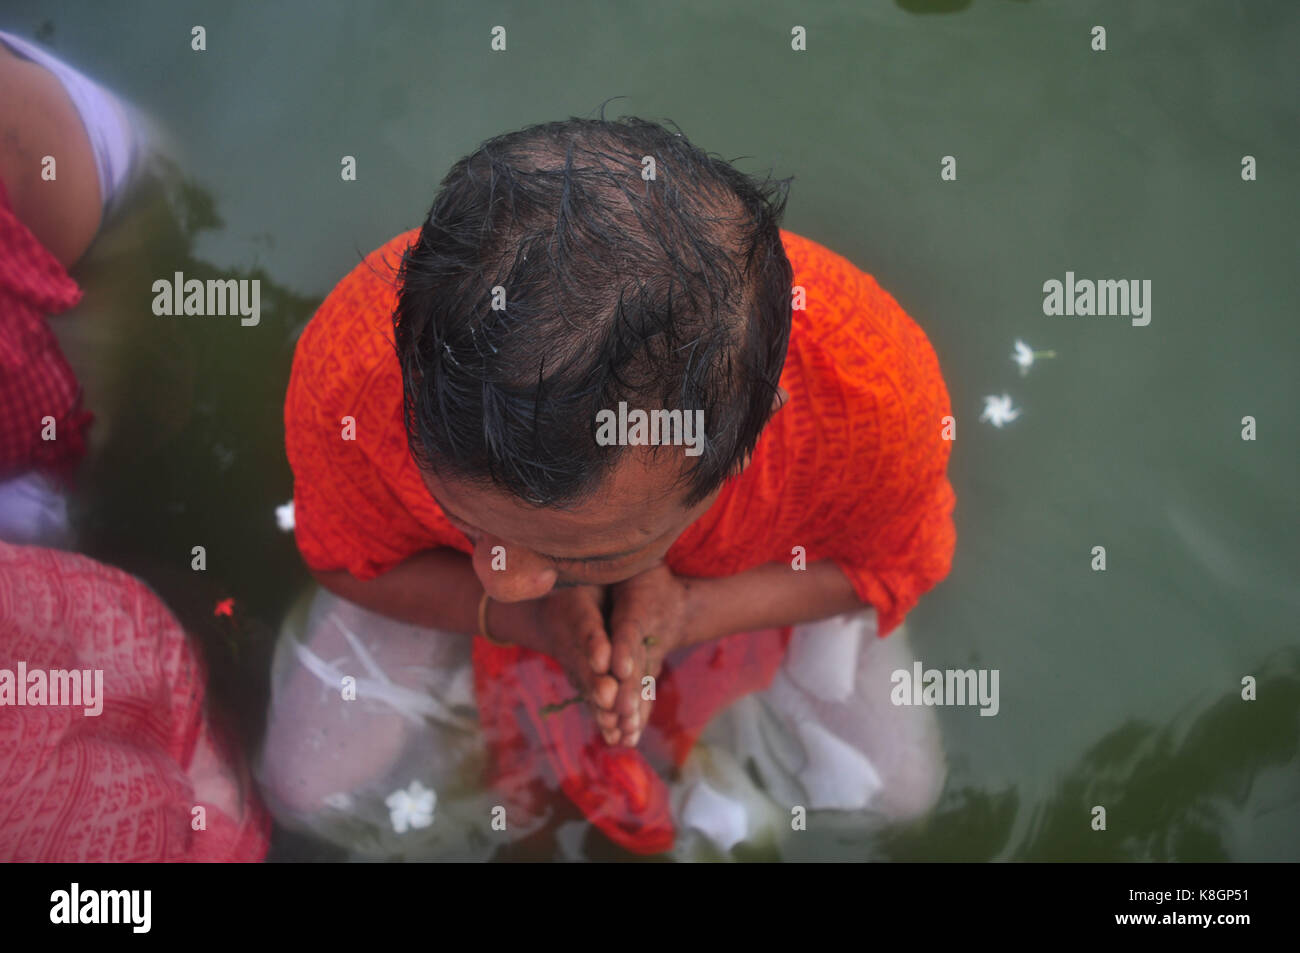 Agartala, India. 19th Sep, 2017. Indian Hindu devotees performs Tarpan, a ritual to pay obeisance to one's forefathers on the last day for offering prayers to ancestors called Pitritarpan in Tripura, India, on September 19, 2017. In Hindu mythology, this day is also called 'Mahalaya' and described as the day when the Gods created the ten armed Goddess Durga to destroy the demon king Asur who plotted to drive out the gods from their kingdom. The five-day period of worship of Durga, who is attributed as the destroyer of evil. Credit: Abhisek Saha/Pacific Press/Alamy Live News Stock Photo